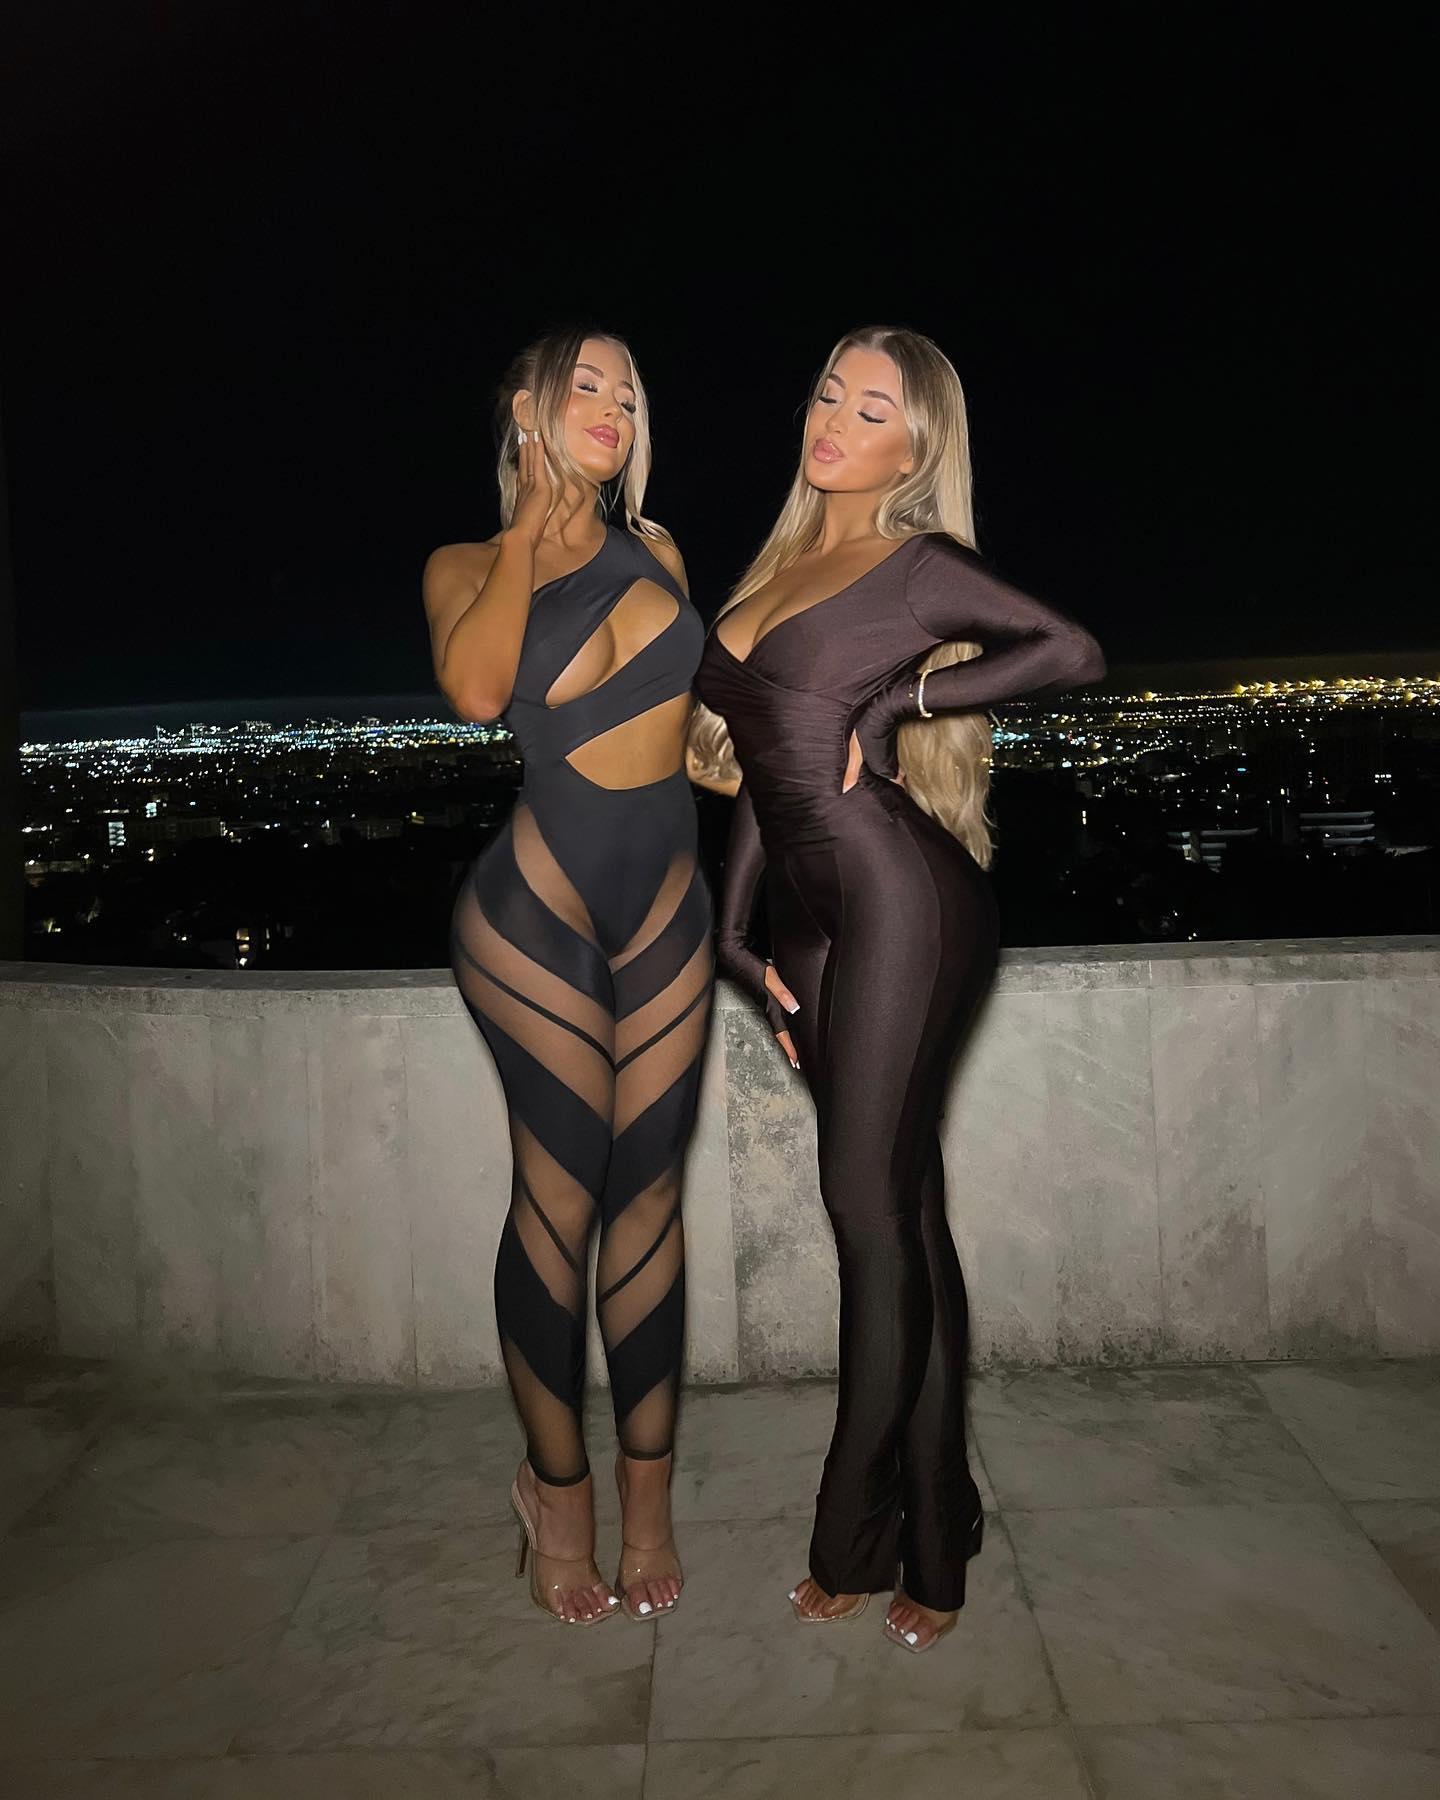 Eve Gale and Jessica Rose Gale pose in sheer bodysuits